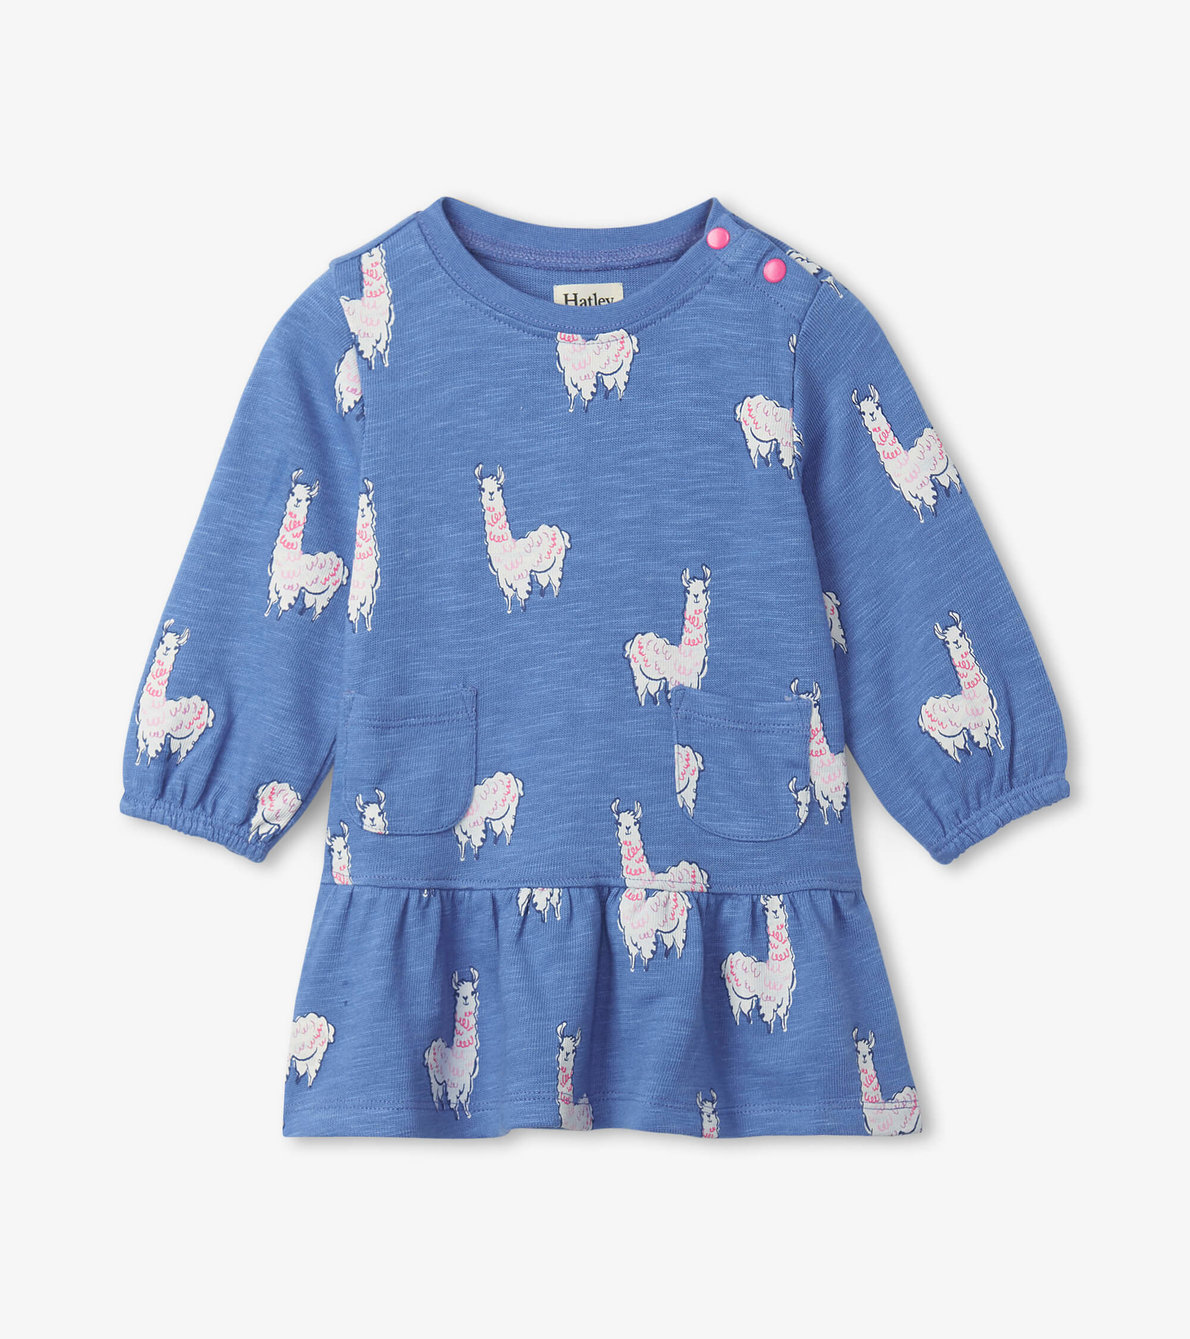 View larger image of Friendly Alpacas Baby Dress